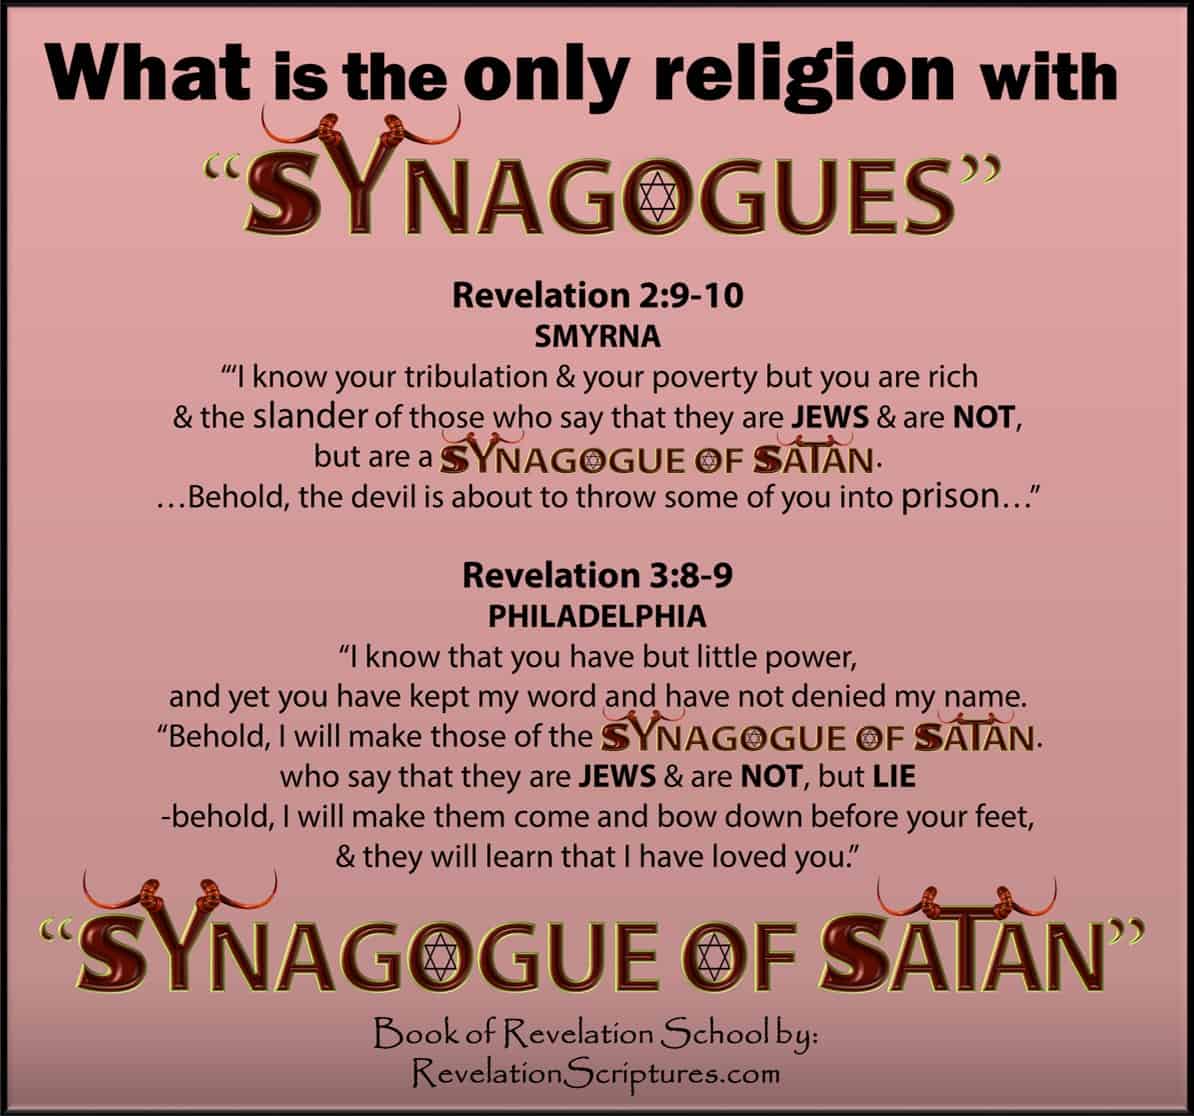 Synagogue of Satan,Jews who are not,Jews who lie,Smyrna,Philadelphia,2 approved churches,7 Churches of Revelation,the Synagogue of Satan,Judaism,Christian Zionism,Zionism,Antichrist,Star of David,Rev 2,Rev 3,Revelation 2,Revelation 3,Church of Smyrna,Church of Philadelphia,2 witnesses,Book of Revelation,Fake Jews,Israel,State of Israel,False Phophet,False Prophet of Revelation 13,False Prophet of Revelation,Slander,Jewish Control, 1 John 2:18, 1 John 2:19, 1 John 2:20, 1 John 2:21, 1 John 2:22, 1 John 2:23, 1 John 2:3, 1 John 4:2, 1/3, 13 stars, 13 states, 13 vertical red stripes, 13 vertical white stripes, 144000, 1782, 1948, 2 John 1:7, 2 John 2:10, 2nd Woe, 33, 6th Trumpet, Acts 7:43, Annuit Coeptis, anti semetic, Anti-Christ, anti-judaism, anti-Semitic, Antichrist, antisemitic, antisemitism, apartheid, APIC, Apocalypse, Arrows, bals eagle, BDS, Beast, Beast from Earth, Bible, Biblical Definition, Biblical Interpretation, Bless Israel, Book of Revelation, bow down, Boycott, Capital Jerusalem, Charles Thomas, Christian Zionism, Church of Philadelphia, Church of Smyrna, city of David, coat of arms, colonialism, congress, Curse Israel, demon, demons, denies Jesus, denies Jesus is the Christ, Denies the Father and the Son, devil, devil’s offspring, devil’s seed, Divestment, do not confess the coming of Jesus in the flesh, do not greet, do not receive into home, does not confess Jesus, dollar bill, dome of the rock, E pluribus unum, Eagle, Egypt, emblem, ethnic cleansing, eye, Fake Jews, False Prophet, fire from the sky, flag, genocide, God’s chosen Prople, golden rays, Great Britian, Great City, Great Seal, Greater Israel, Greater Plan of Israel, History of Zionism, holocaust, illegal, illegal settlements, Image, Iran War, Israel, Jerusalem, Jerusalem Capital, Jerusalem in the Middle East, Jew, Jewish, jewish lobby, Jewish media control, Jewish messiah, Jewish Synagogue, Jews, Kabbalah, land, last hour, liar, lucifer, lying Jews, many antichrists, mark, mark of identification, mason, masonic, Meaning, Moloch, money symbols, Mount Zion, nation, national coat of arms, Nazi, New Jerusalem, new order of the ages, not from God, novus ordo seclorum, Occult, Oded Yinin, old Jerusalem, olive branch, one dollar bill, out of many one, philadelphia, Phoenix, political Zionism, promised land, propaganda, Remphan, Revelation, Revelation 11:8, Revelation 13, Revelation 2:9, Revelation 3:9, revised history, rockefeller, Rothschild, sanctions, satan, satanic, Say the are Jews but lie, say they are Jews but are not, Scriptural Definition, Scriptural Interpretation, Second woe, seed of the devil, shield, sinister, Sixth Trumpet, Slander, smyrna, Sodom, Spiritually called Sodom & Egypt, Star of David, Star of David is Demonic Satanic Infiltration of Christianity – Synagogue of Satan, star of Molech, Star of Remphan, Star of Rephan, state of Israel, symbol, Symbolically called sodom and egypt, symbols on dollar bill, Synagogue, Synagogue of Satan, Synagogue of Satan & Lying Jews of Revelation 2.9 & 3.9, Talmud, the Antichrist, the Great city, theft, thirteen, throne of Satan, tryiangle, Understand, unfinished pyramid, United States of America, USA, What does the Bible Say, where our lord was crucified, zion, Zionism, Zionist